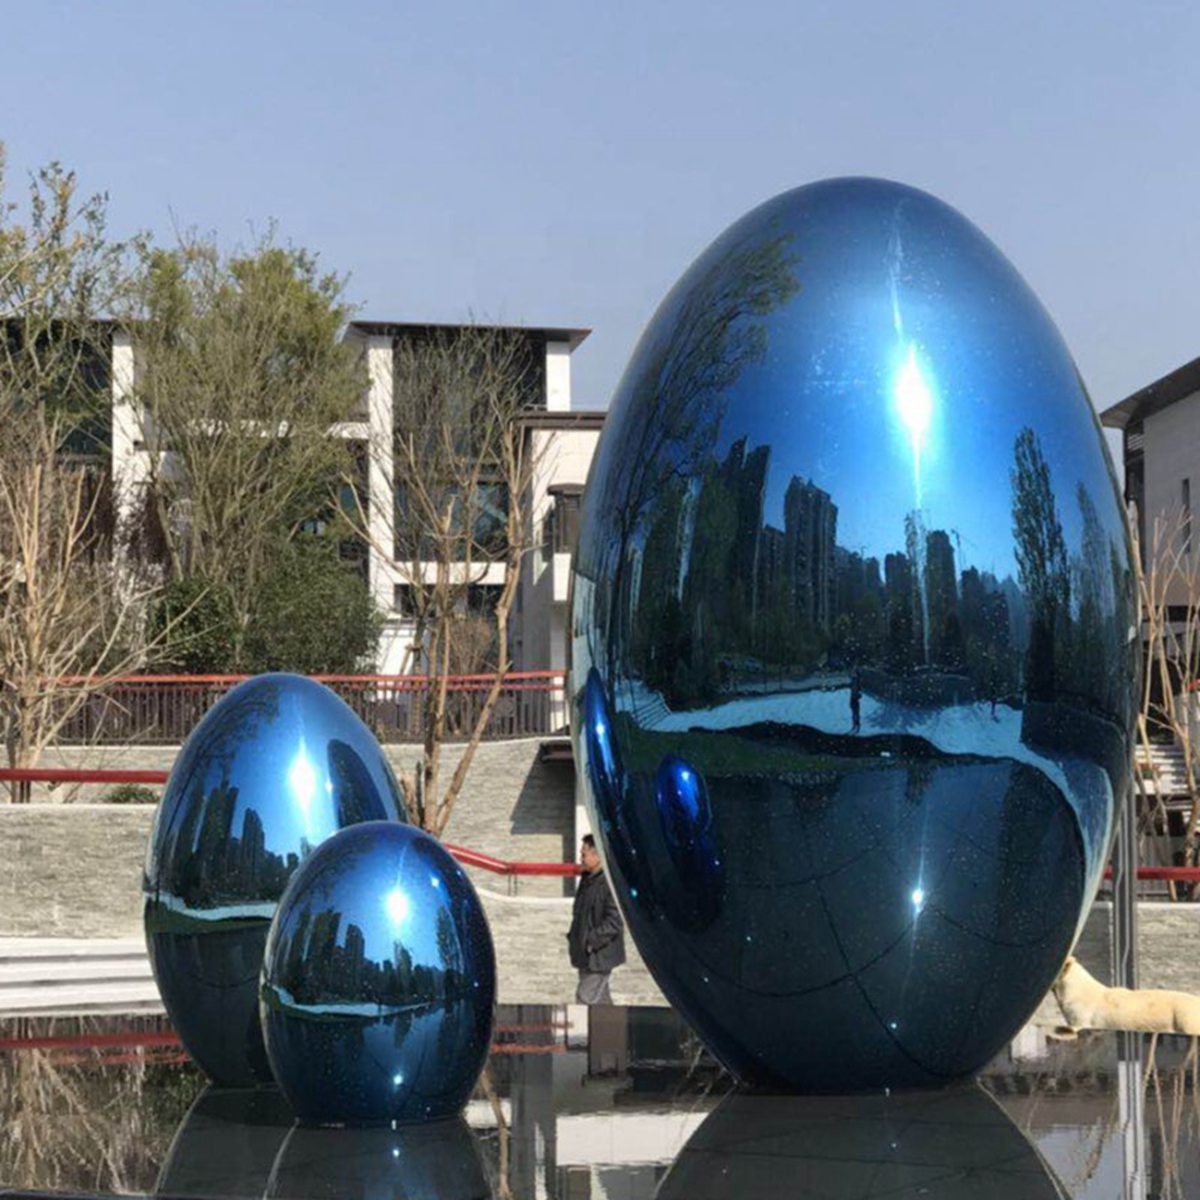 stainless steel eggs statue (6)